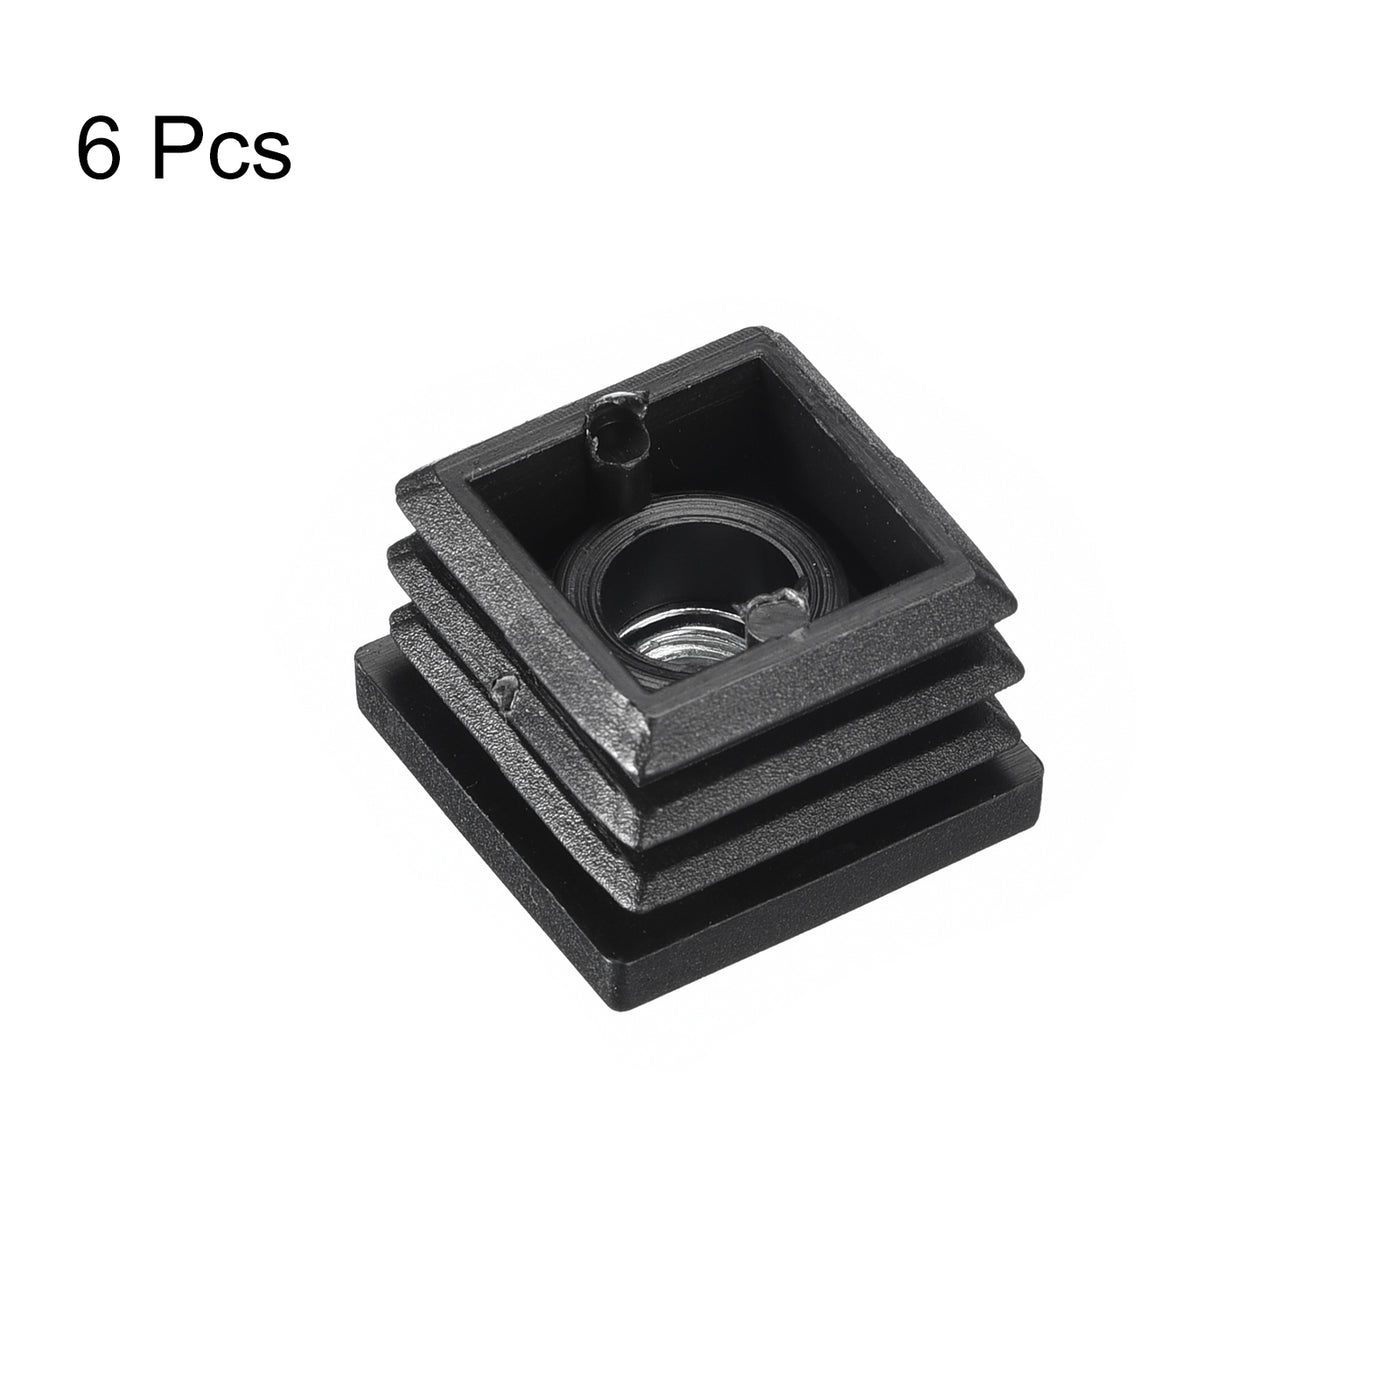 uxcell Uxcell 6Pcs 0.98"x0.98" Caster Insert with Thread, Square M8 Thread for Furniture